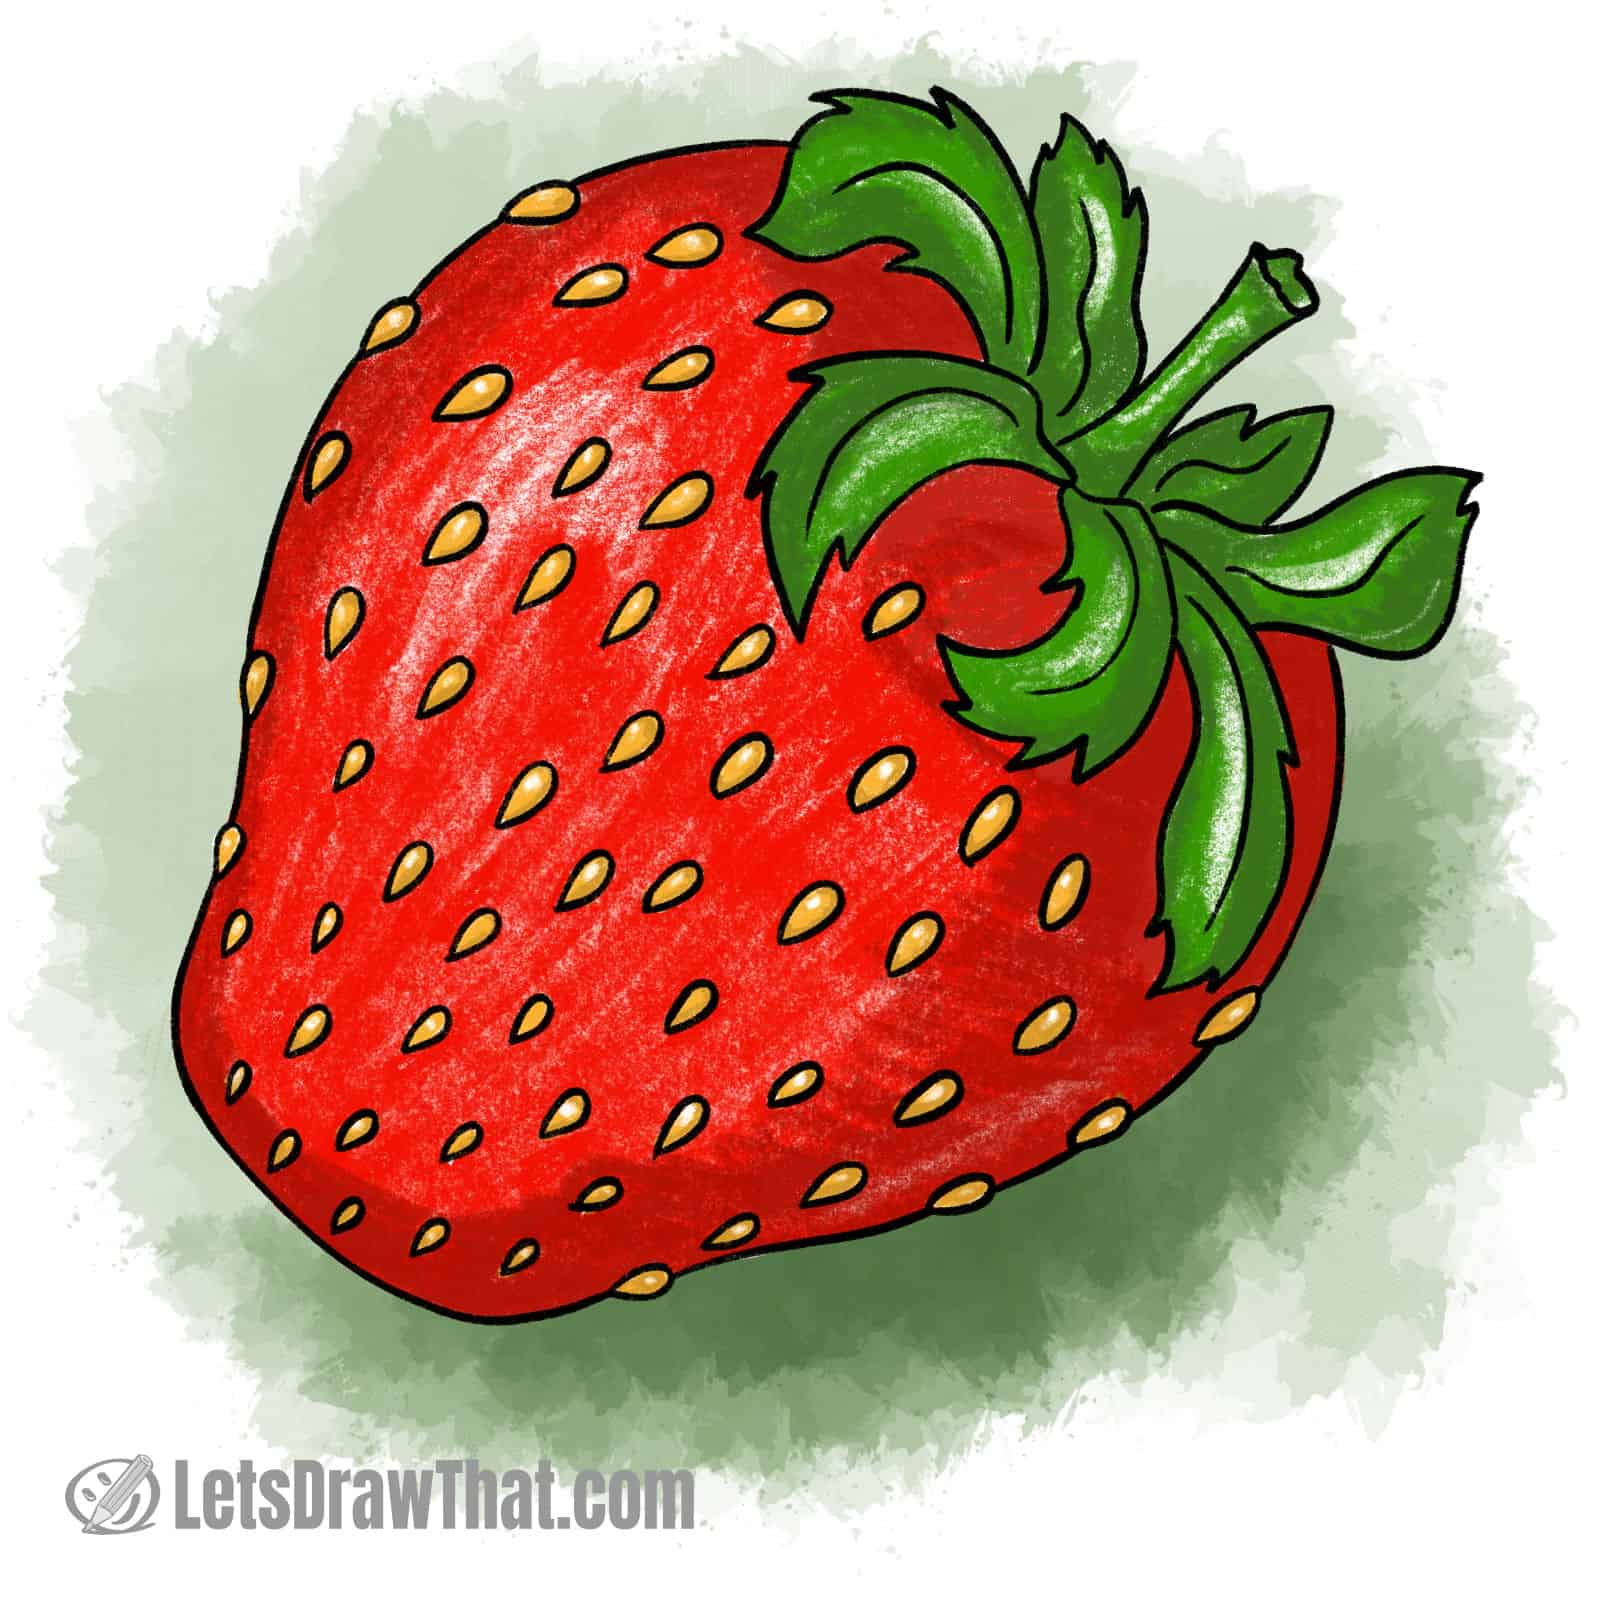 How to draw a strawberry: finished strawberry drawing coloured-in